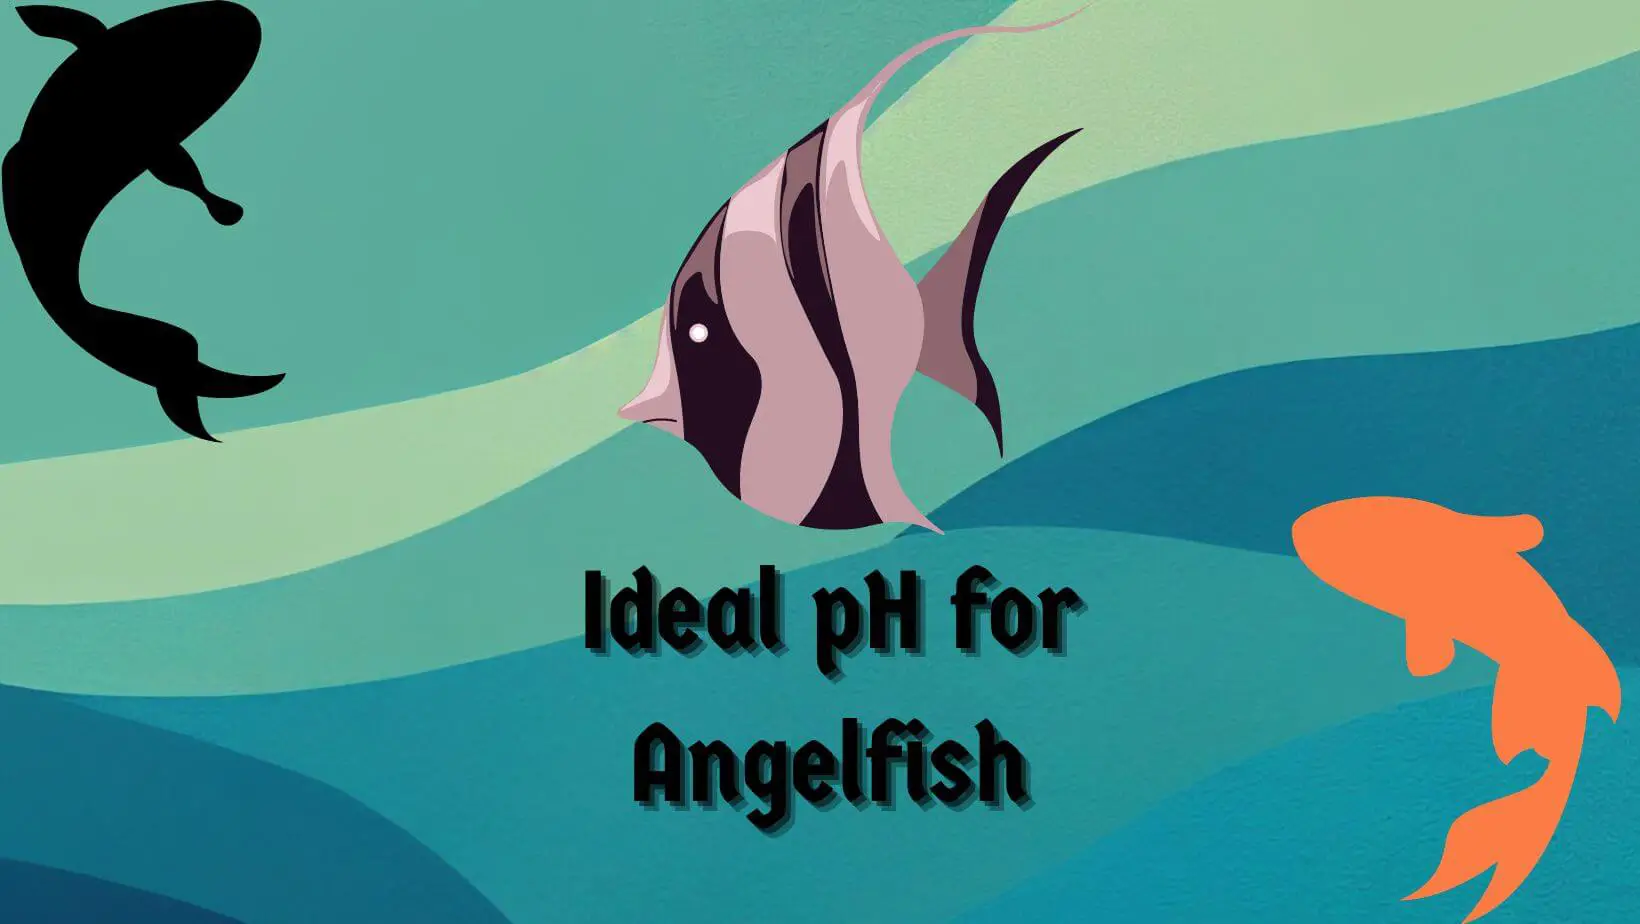 Ideal pH for Angelfish